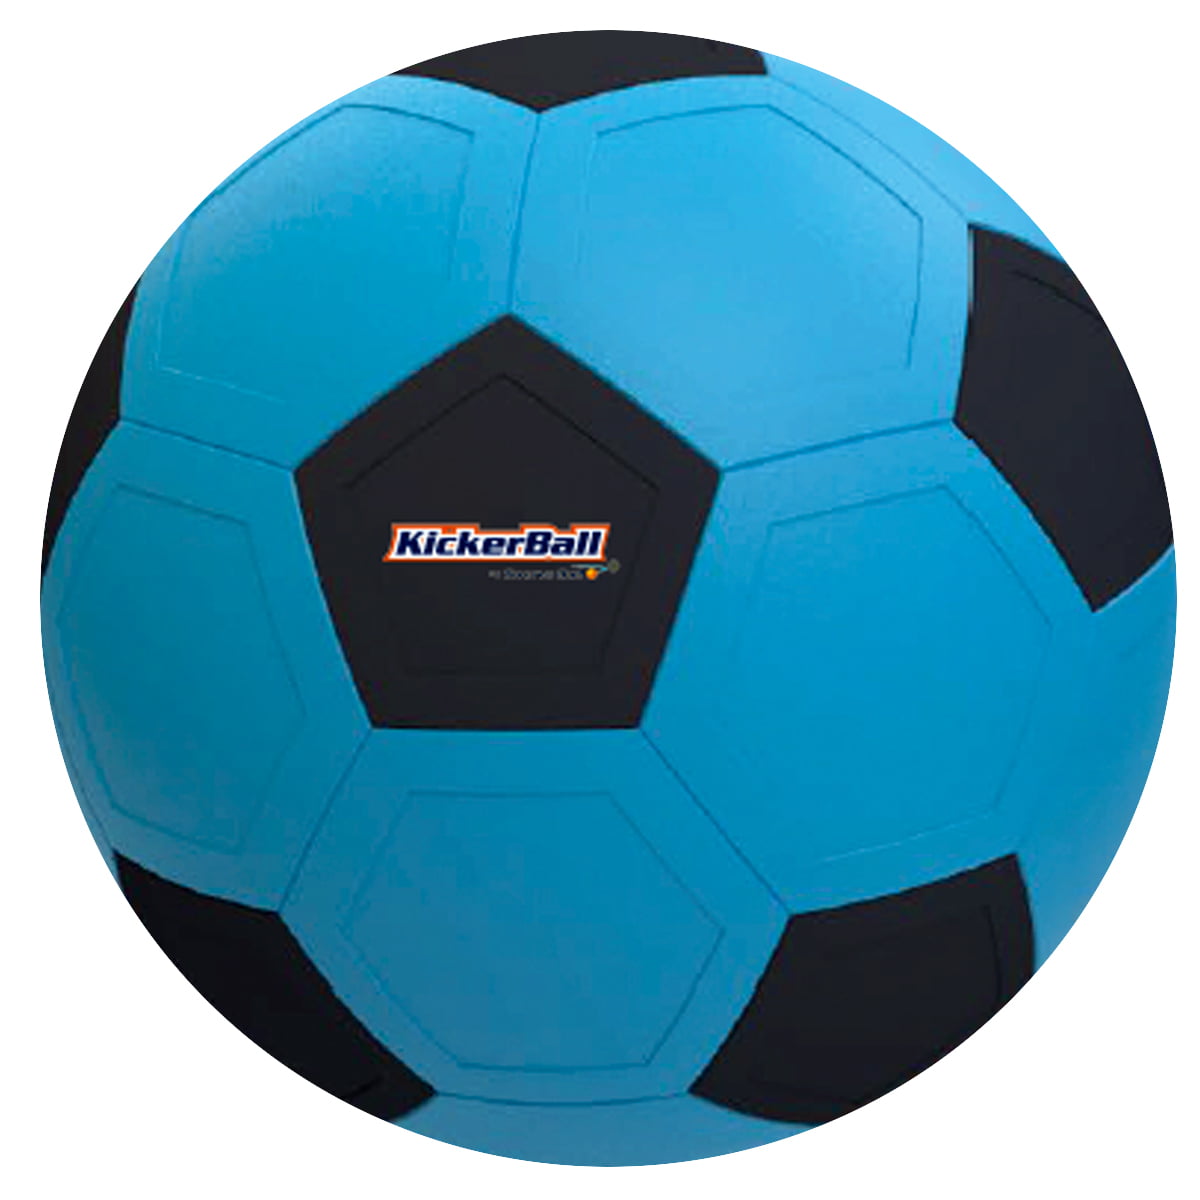 KickerBall Soccer Ball, Trick Ball that Curves and Swerves, Blue, As Seen  on TV